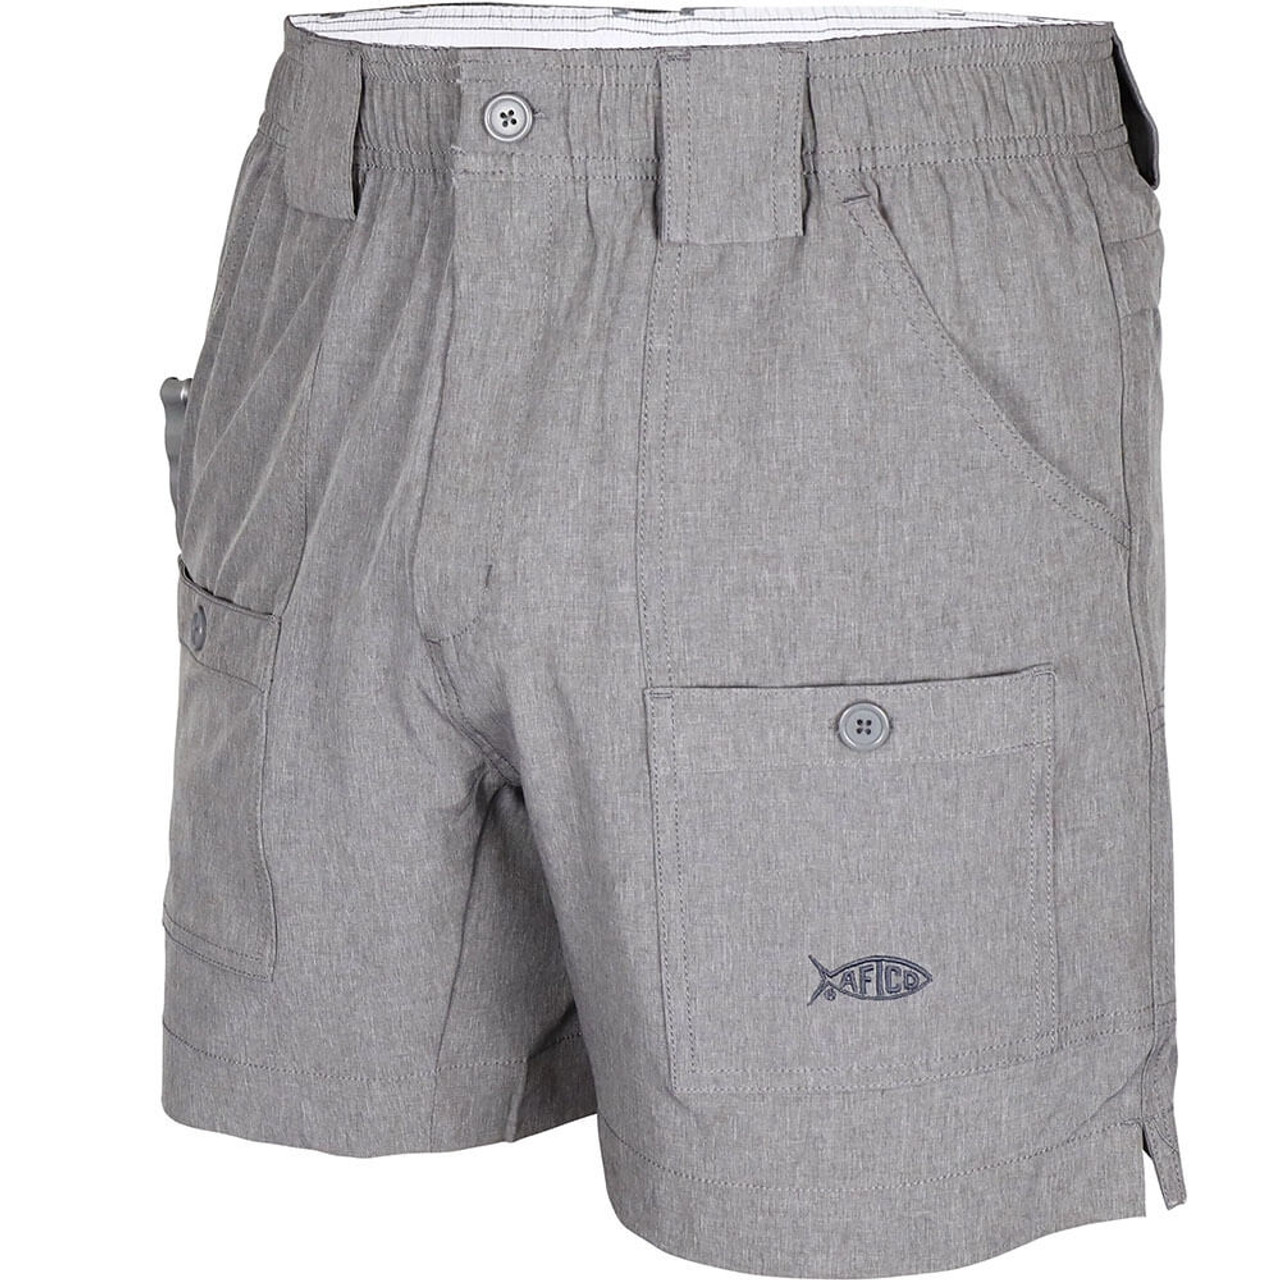 https://cdn11.bigcommerce.com/s-zut1msomd6/images/stencil/1280x1280/products/13920/207564/aftco-mens-6-inch-stretch-short-CHHR-charcoal-heather-front-main__67930.1643660331.jpg?c=1